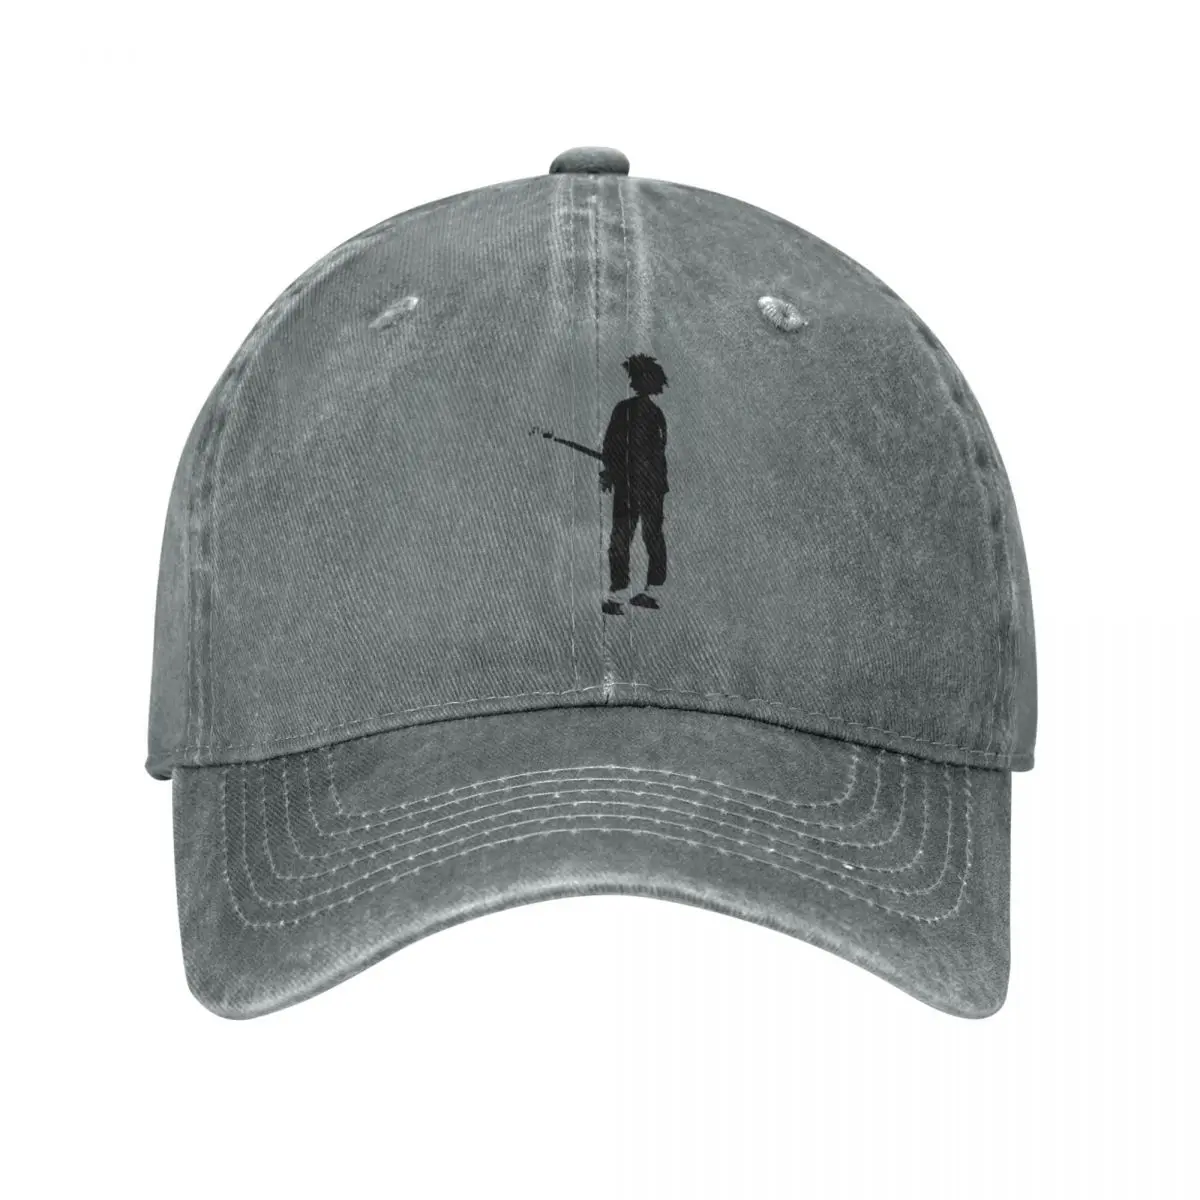 

Boys Don't Cry Trucker Hats Outfit Casual Distressed Cotton The Cure Casquette Dad Hat For Men Women Adjustable